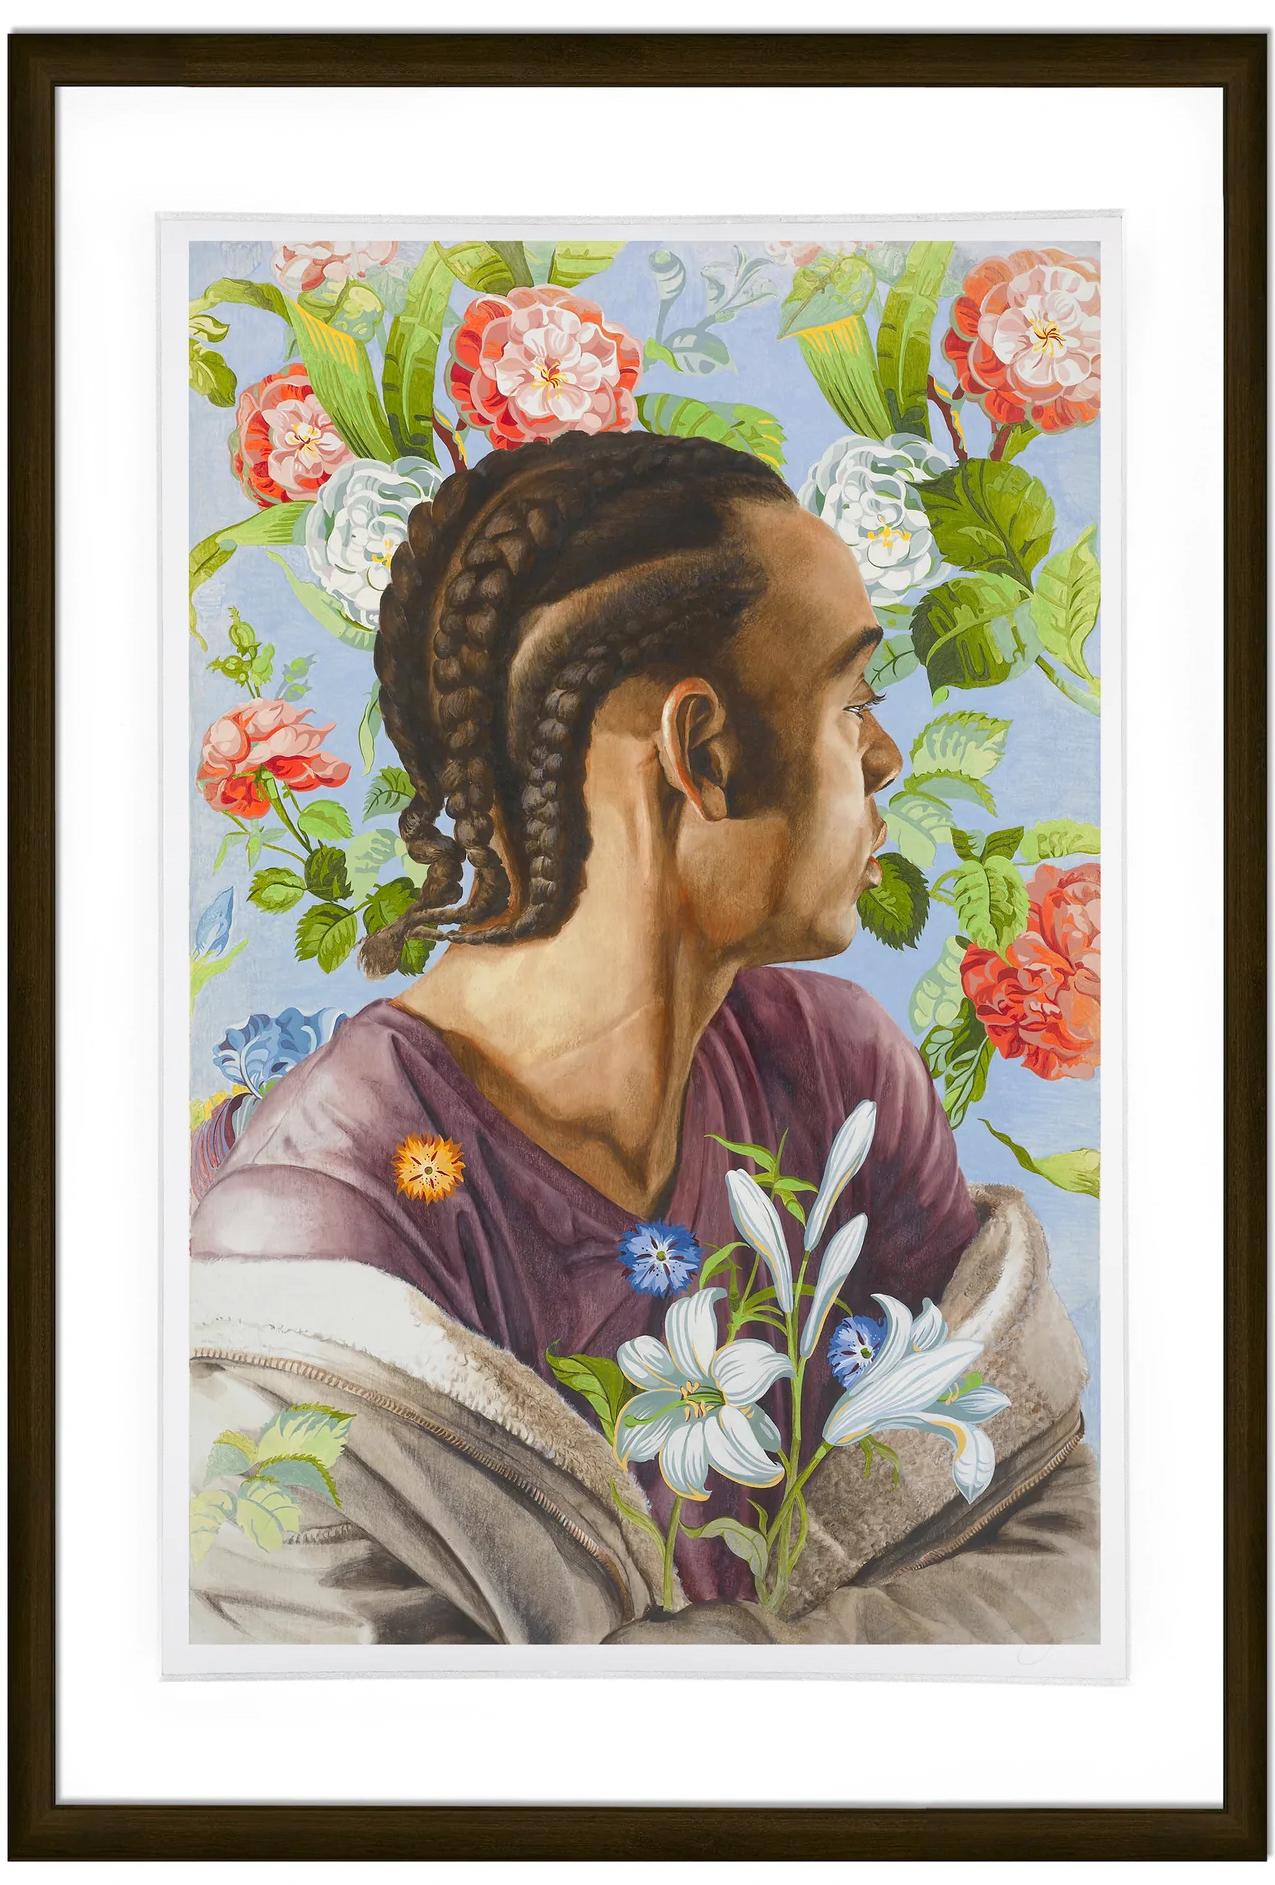 Who is Kehinde Wiley and what is his art about?